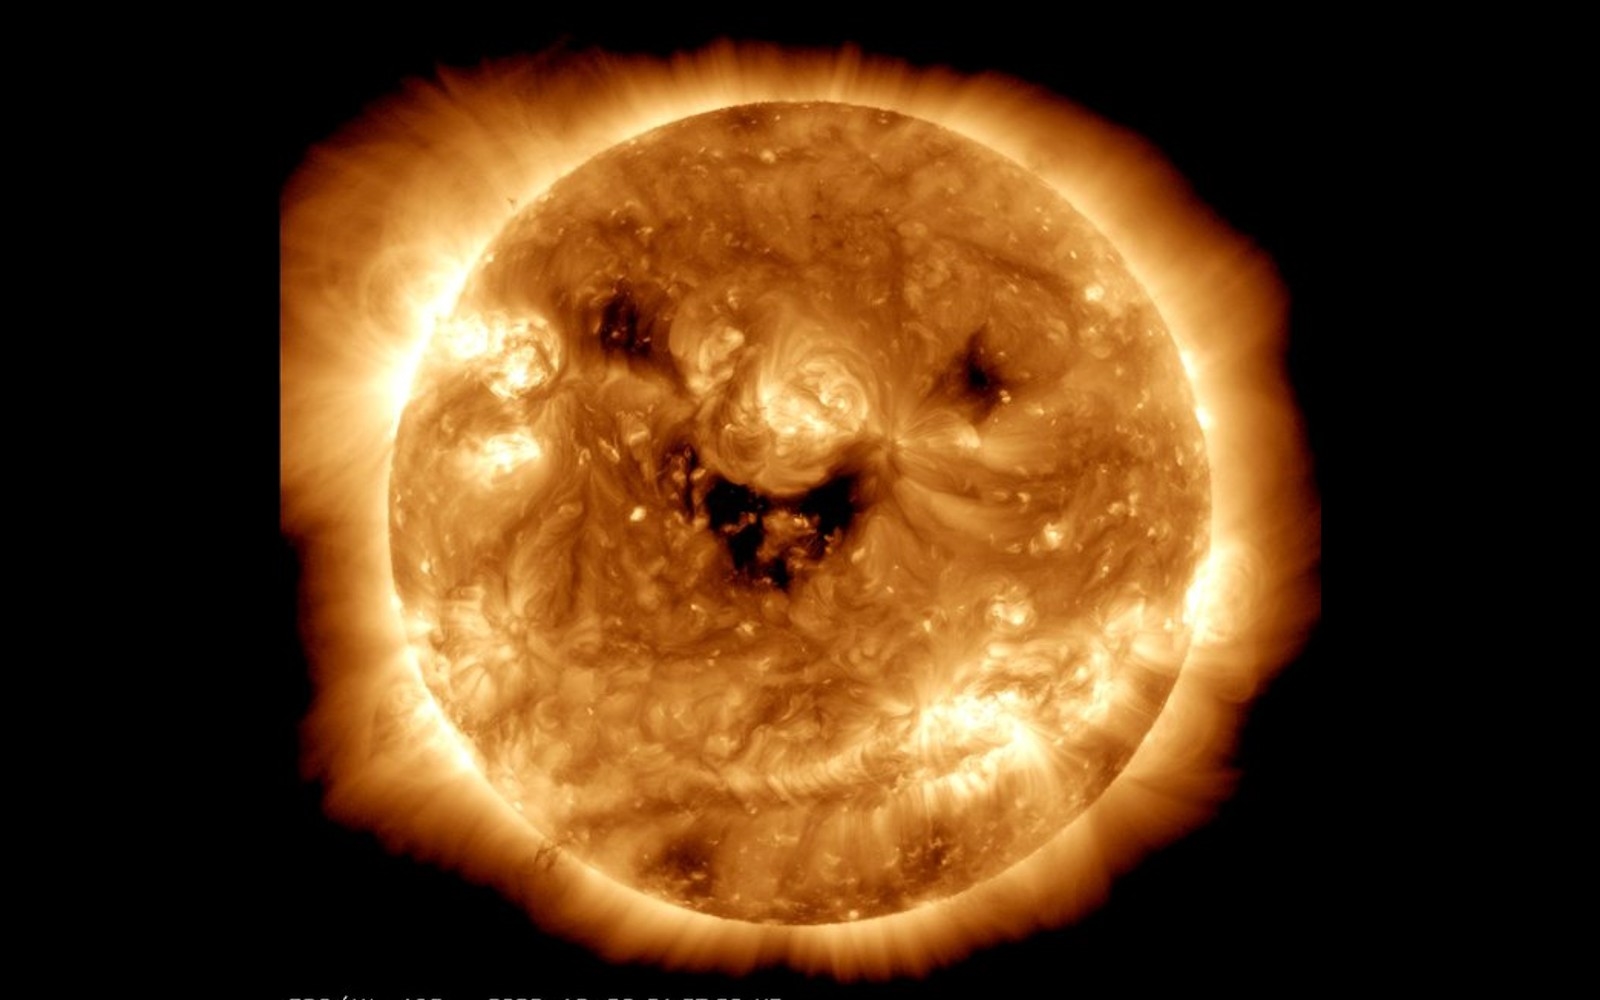 NASA’s Solar Dynamics Observatory captured an image of the sun ‘smiling’ | DeviceDaily.com